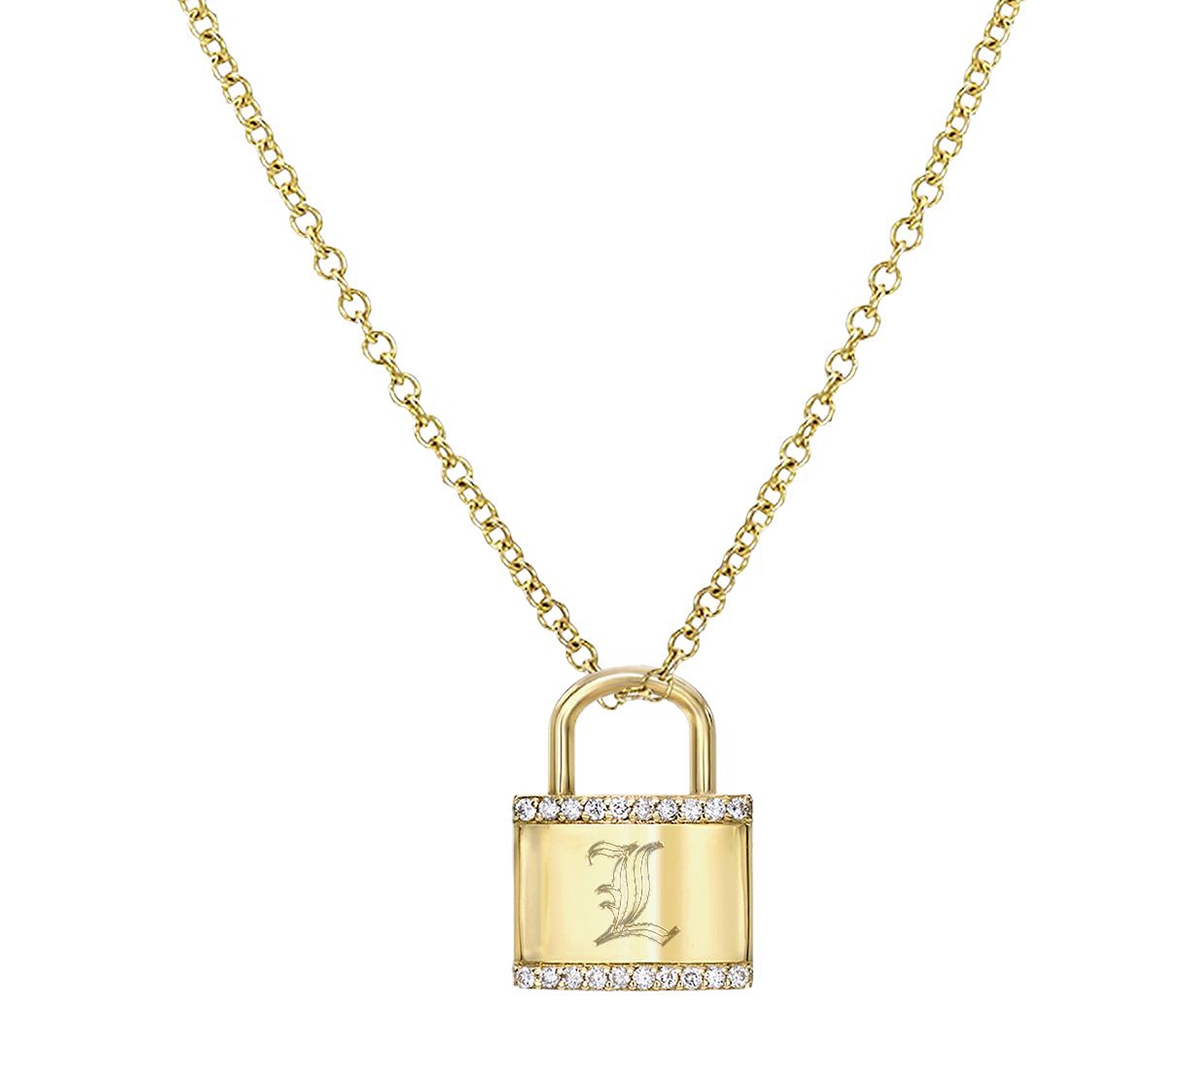 Diamond Accent Initial Lock Pendant Necklace in 14k Gold, 16" + 2" extender - S